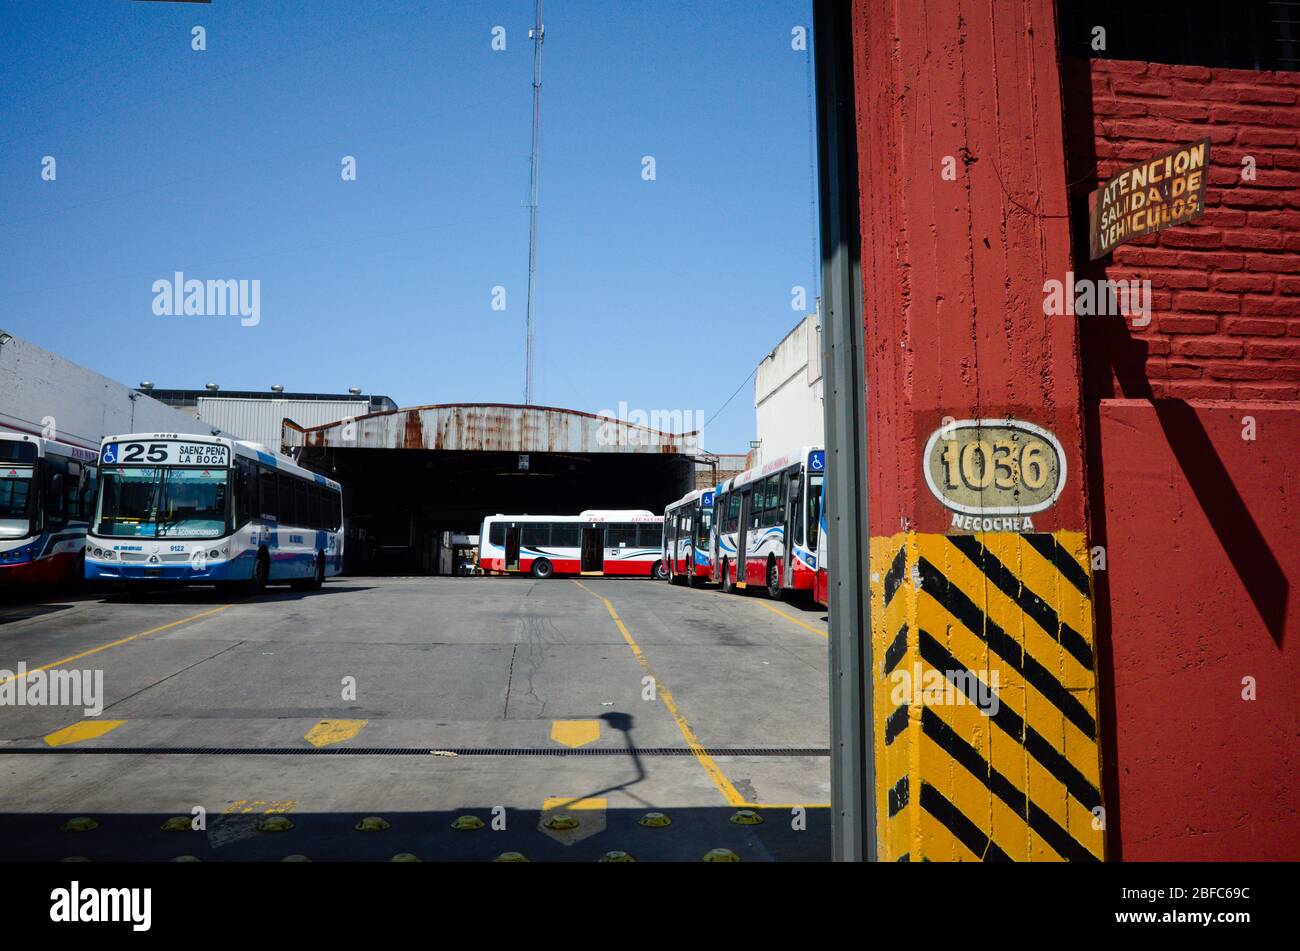 Buenos Aires, Argentina - January, 2020: Group of buses parked in a city bus garage. Necochea 1036 street in Buenos Aires. Parking lot depot of city p Stock Photo